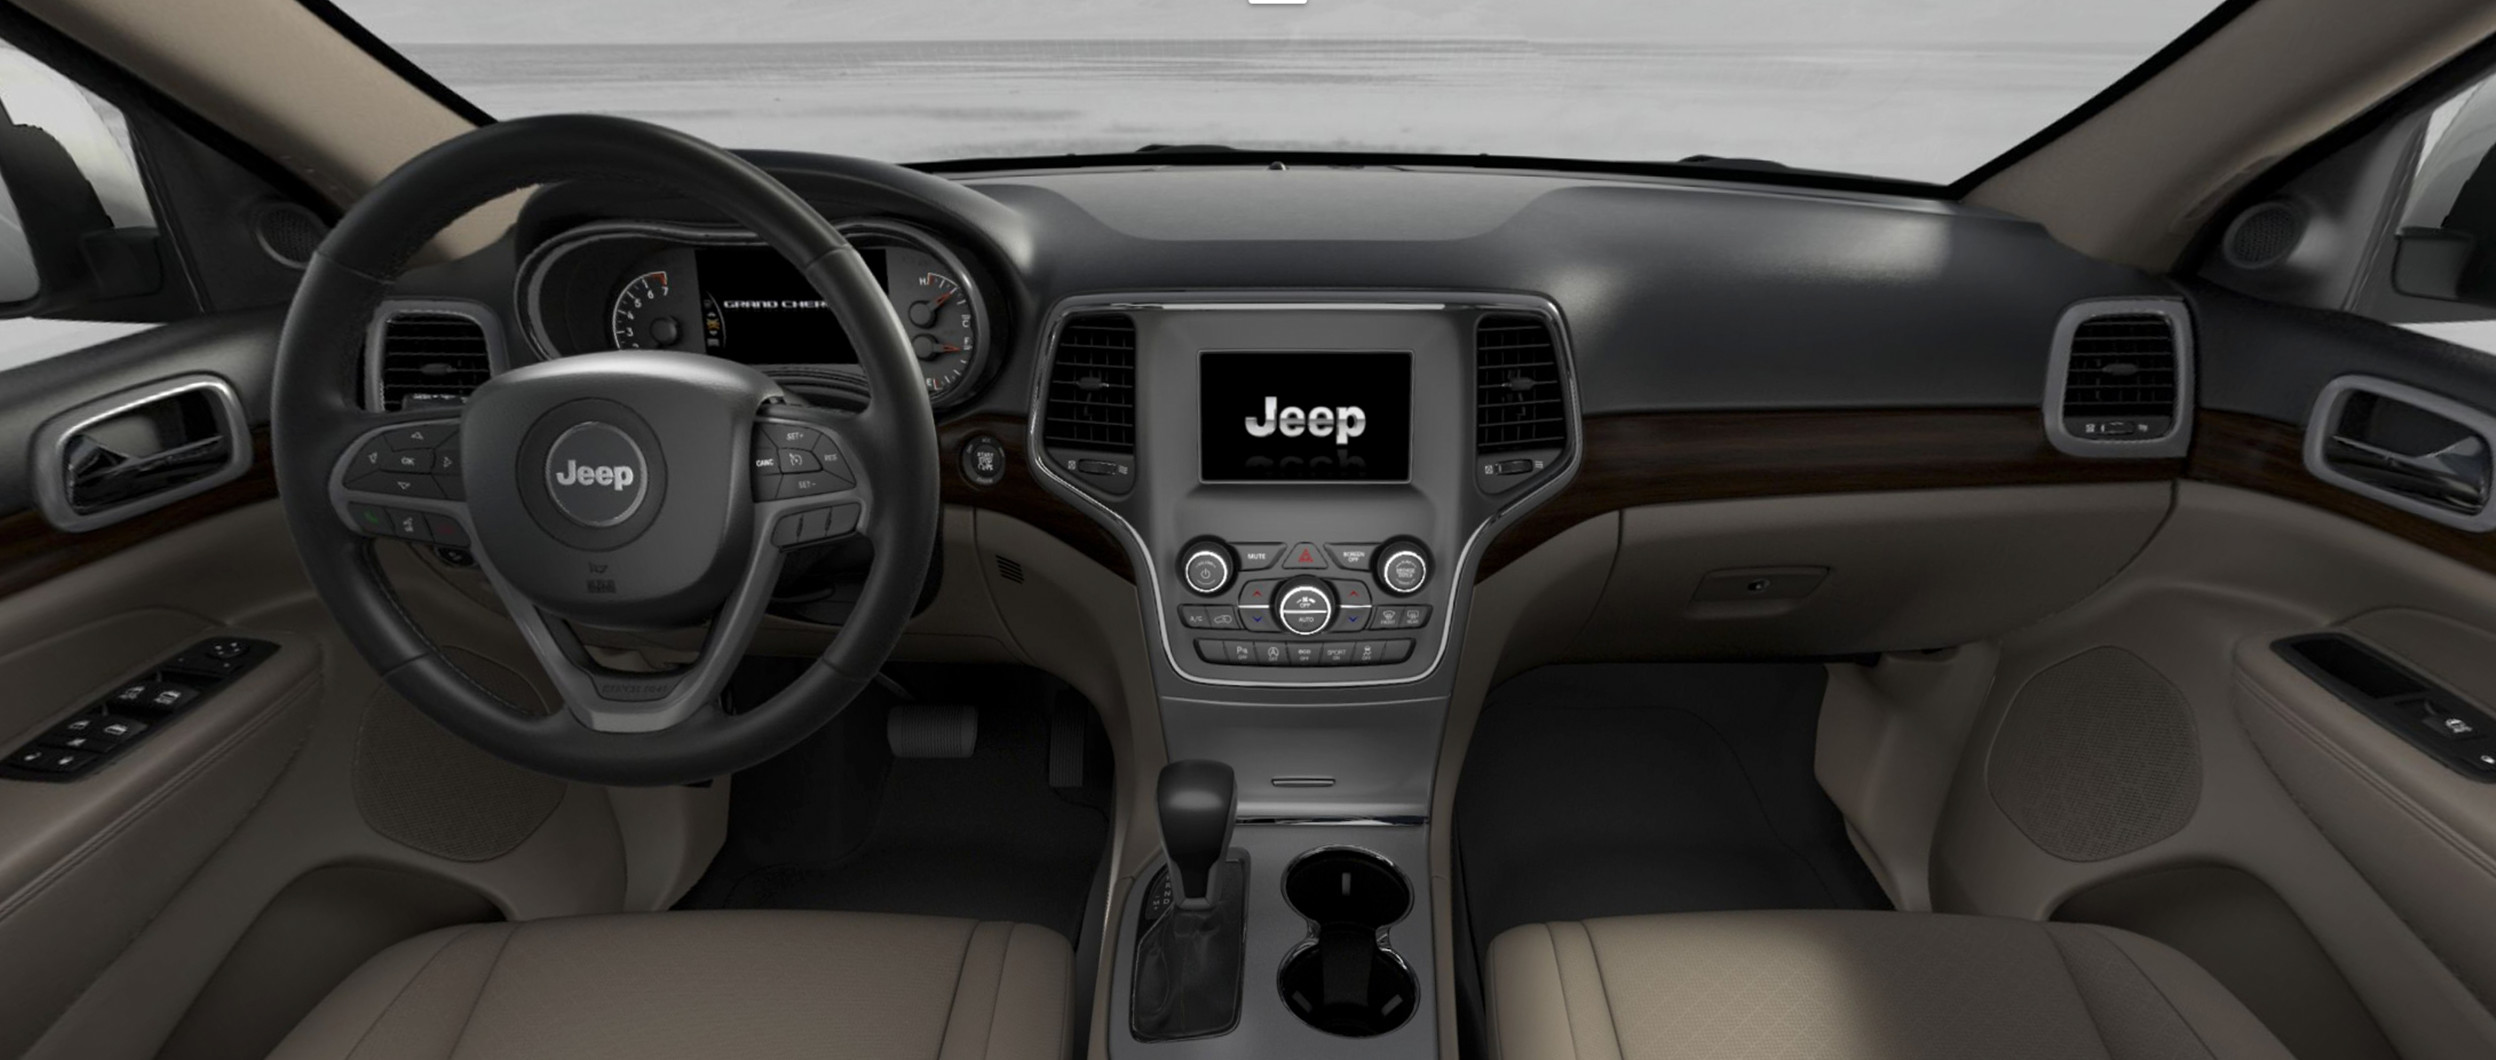 2020 Jeep Grand Cherokee Most Awarded Suv Ever Jeep Canada